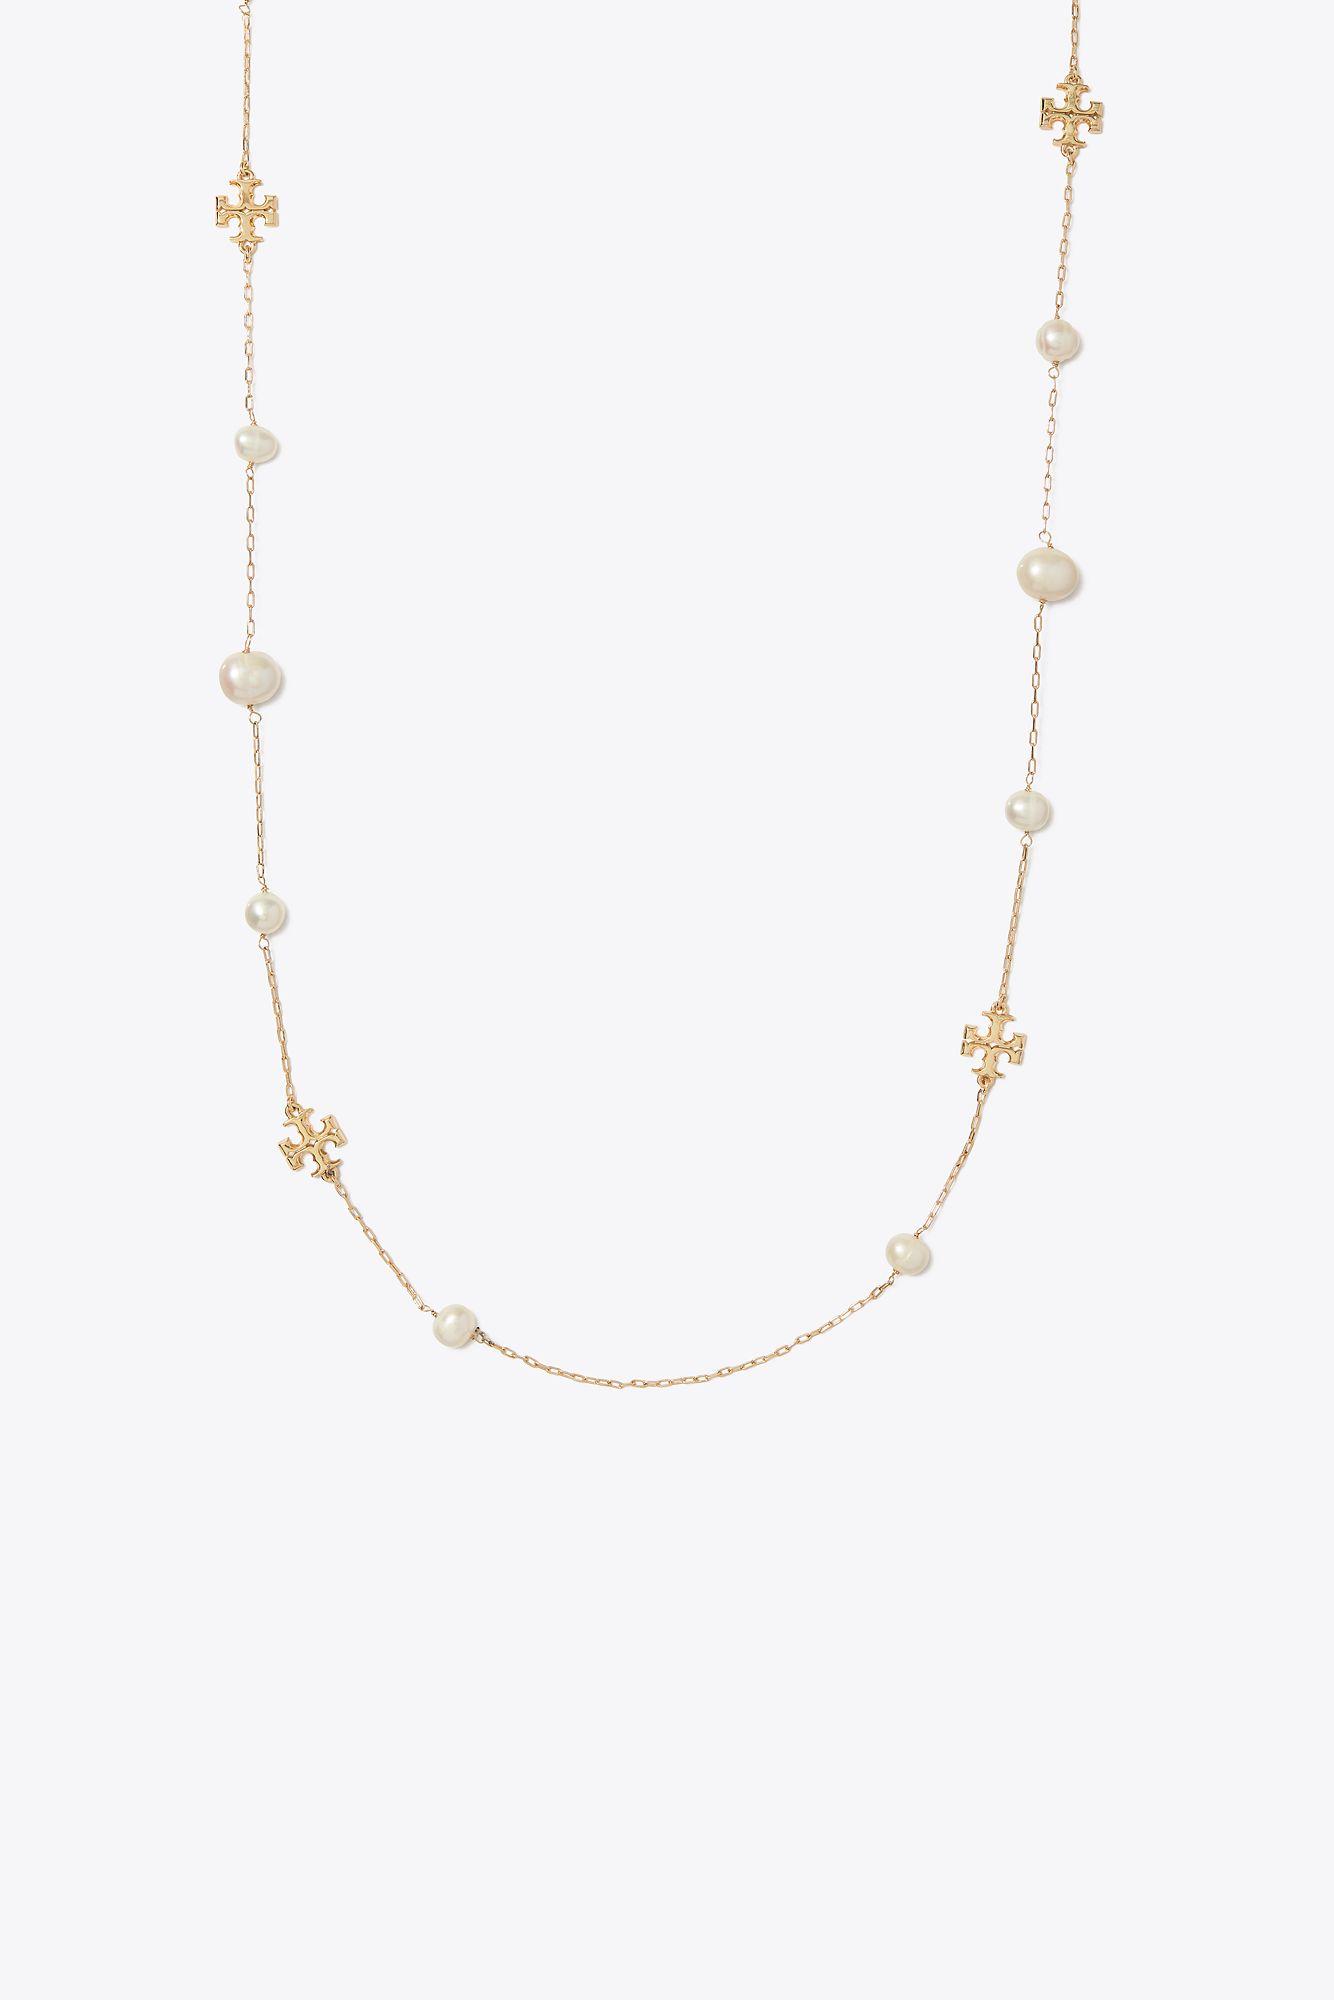 Tory Burch Kira Pearl Long Necklace in White | Lyst